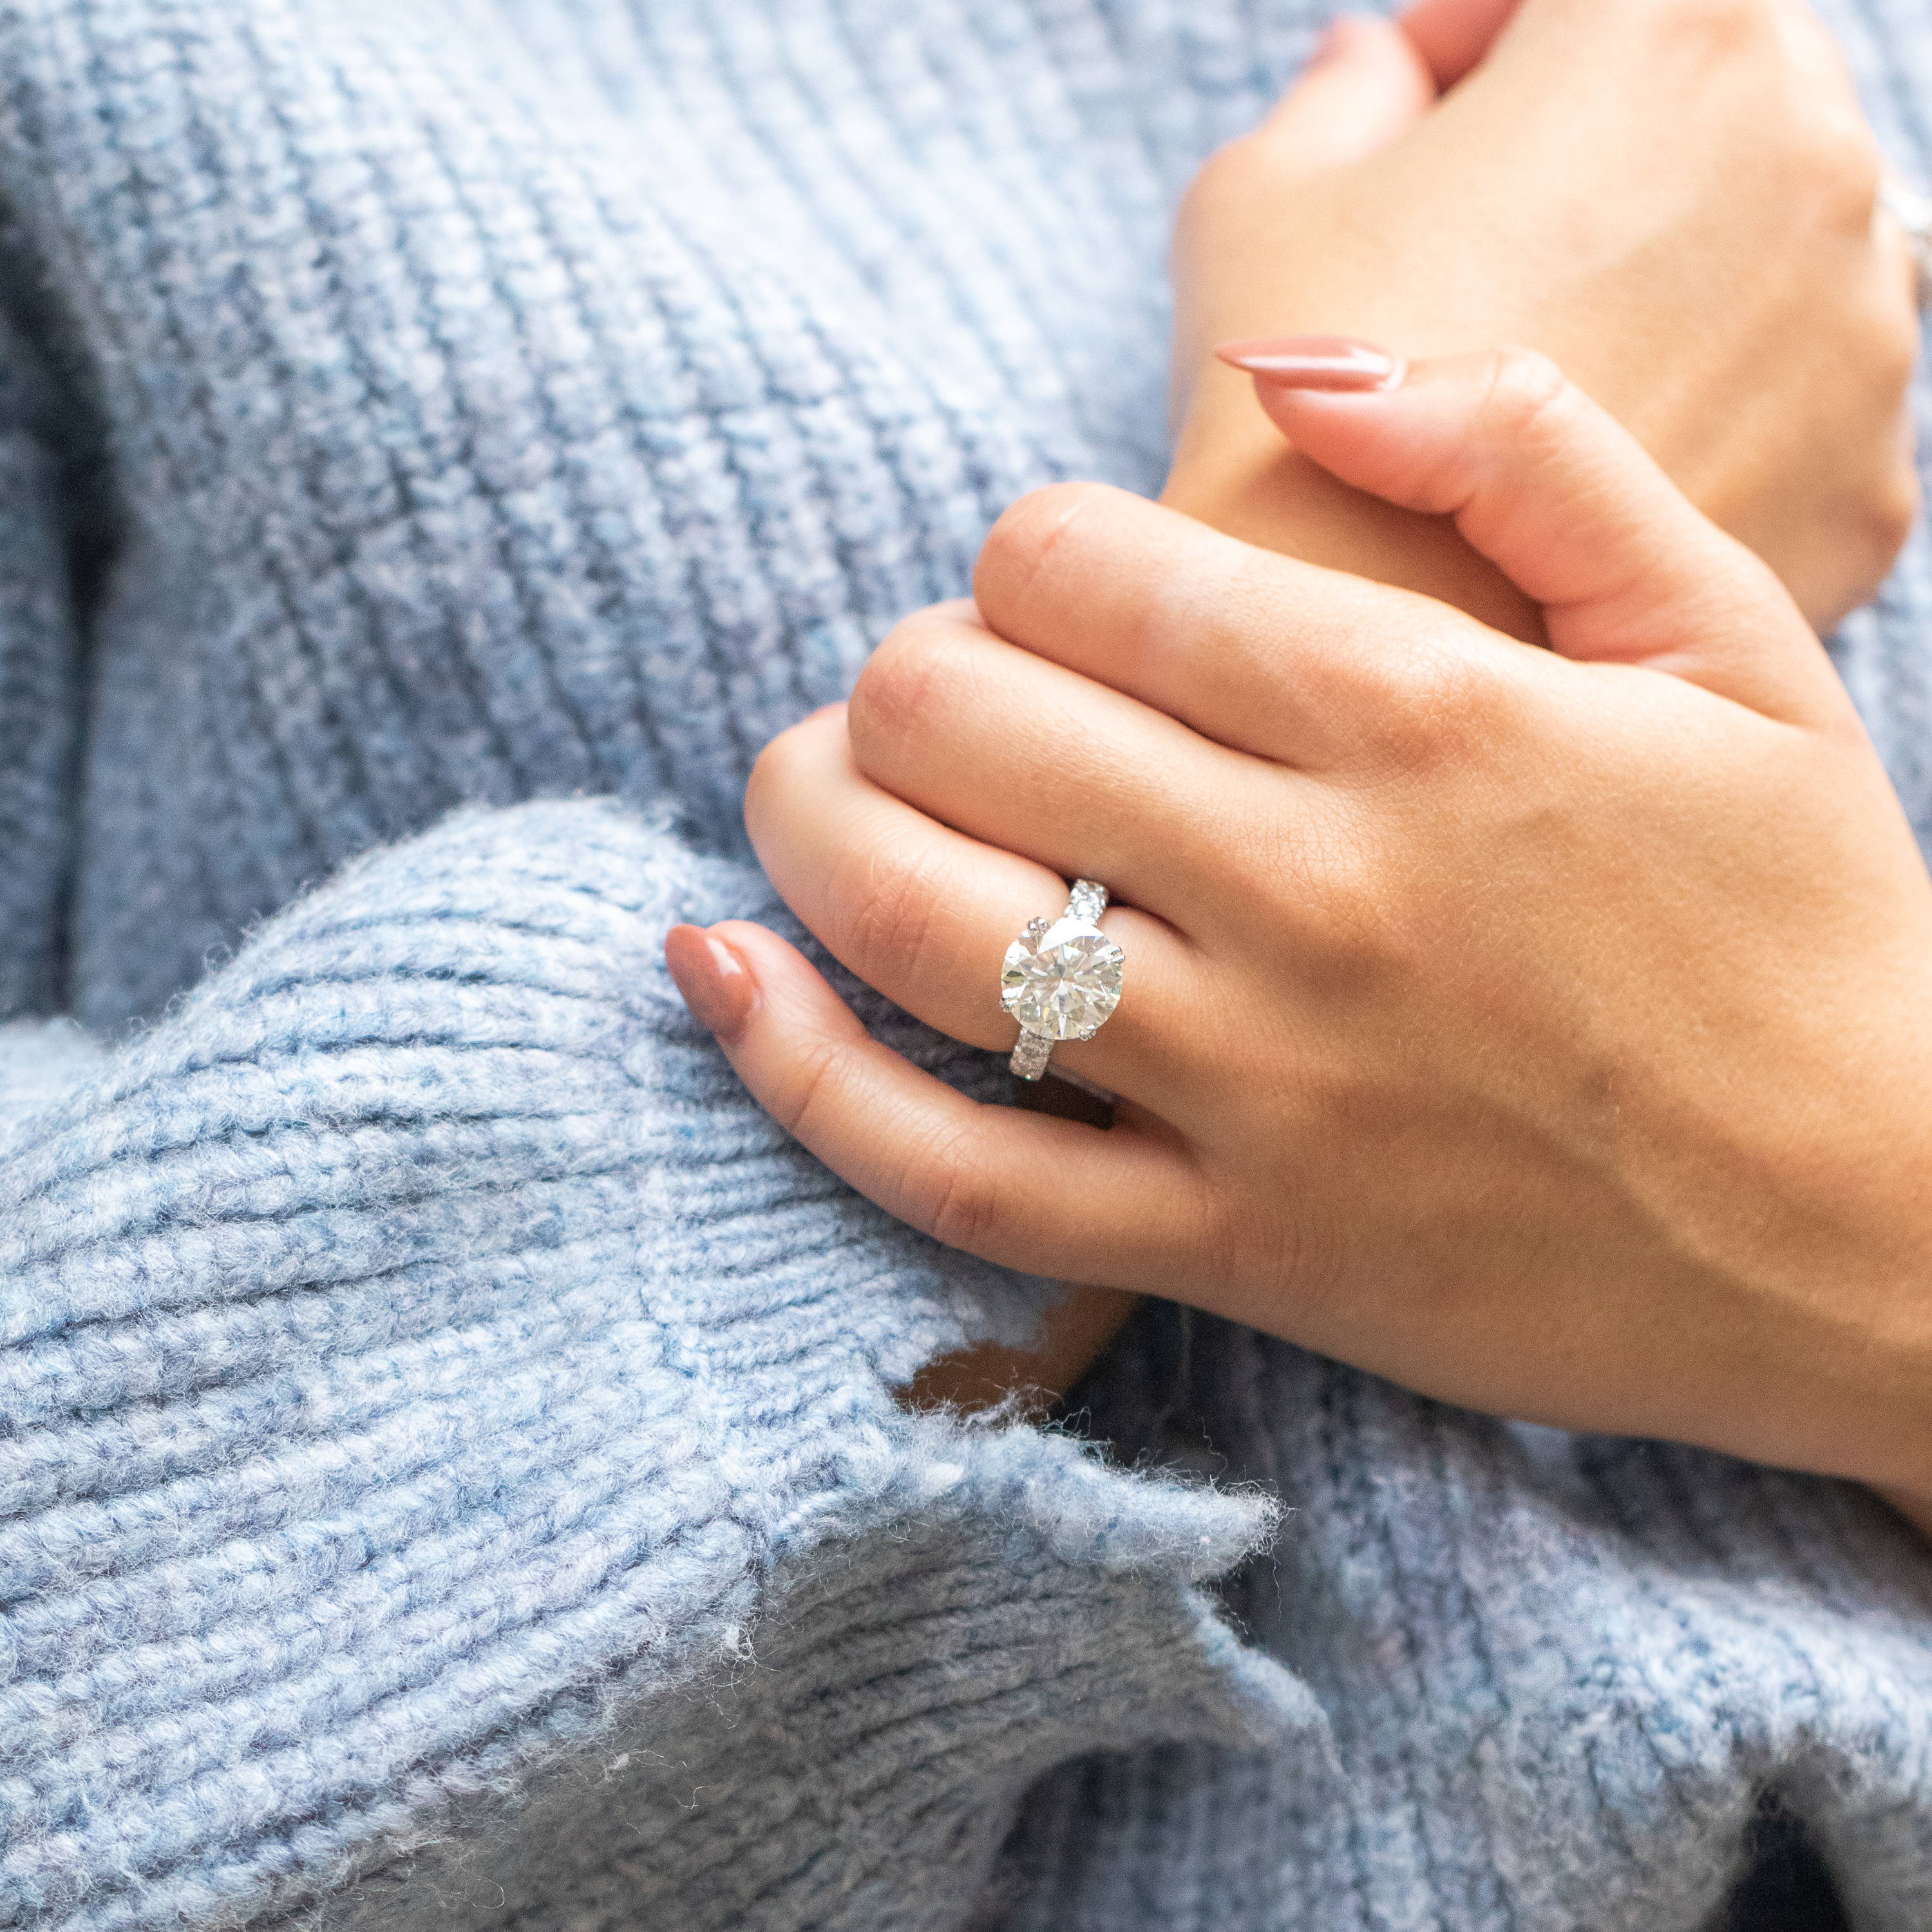 TIPS FOR KEEPING YOUR RING SPARKLING